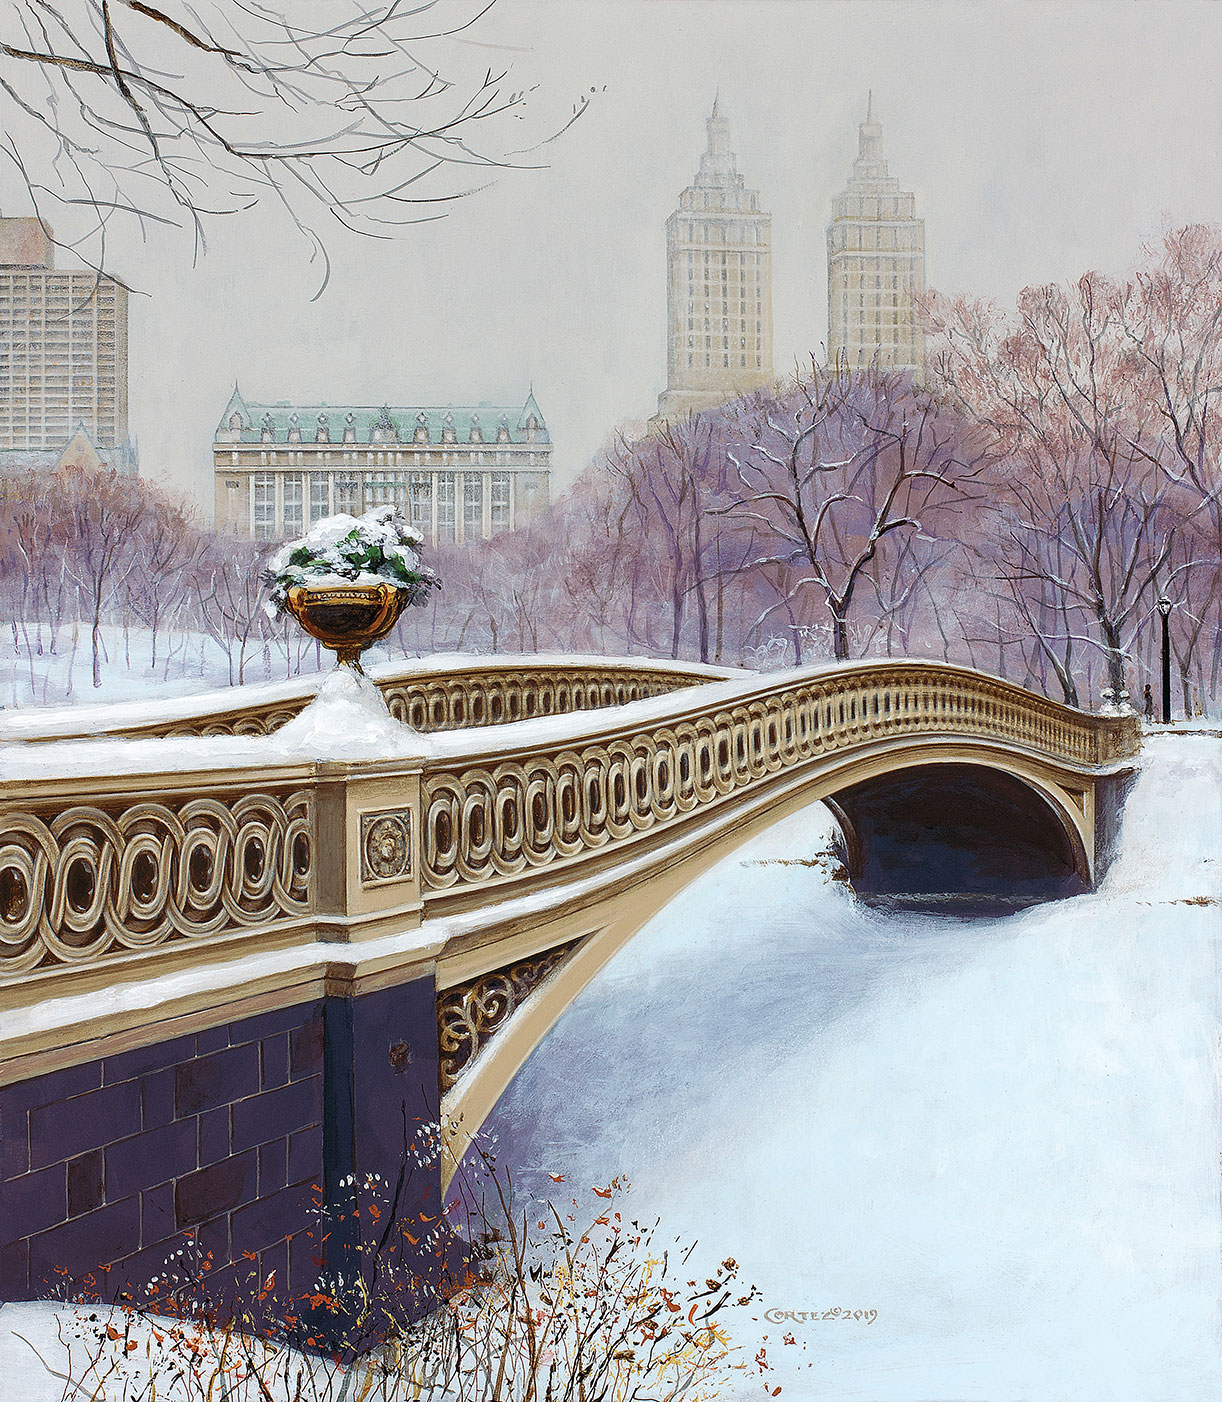 The Bow Bridge in Winter by Jenness Cortez